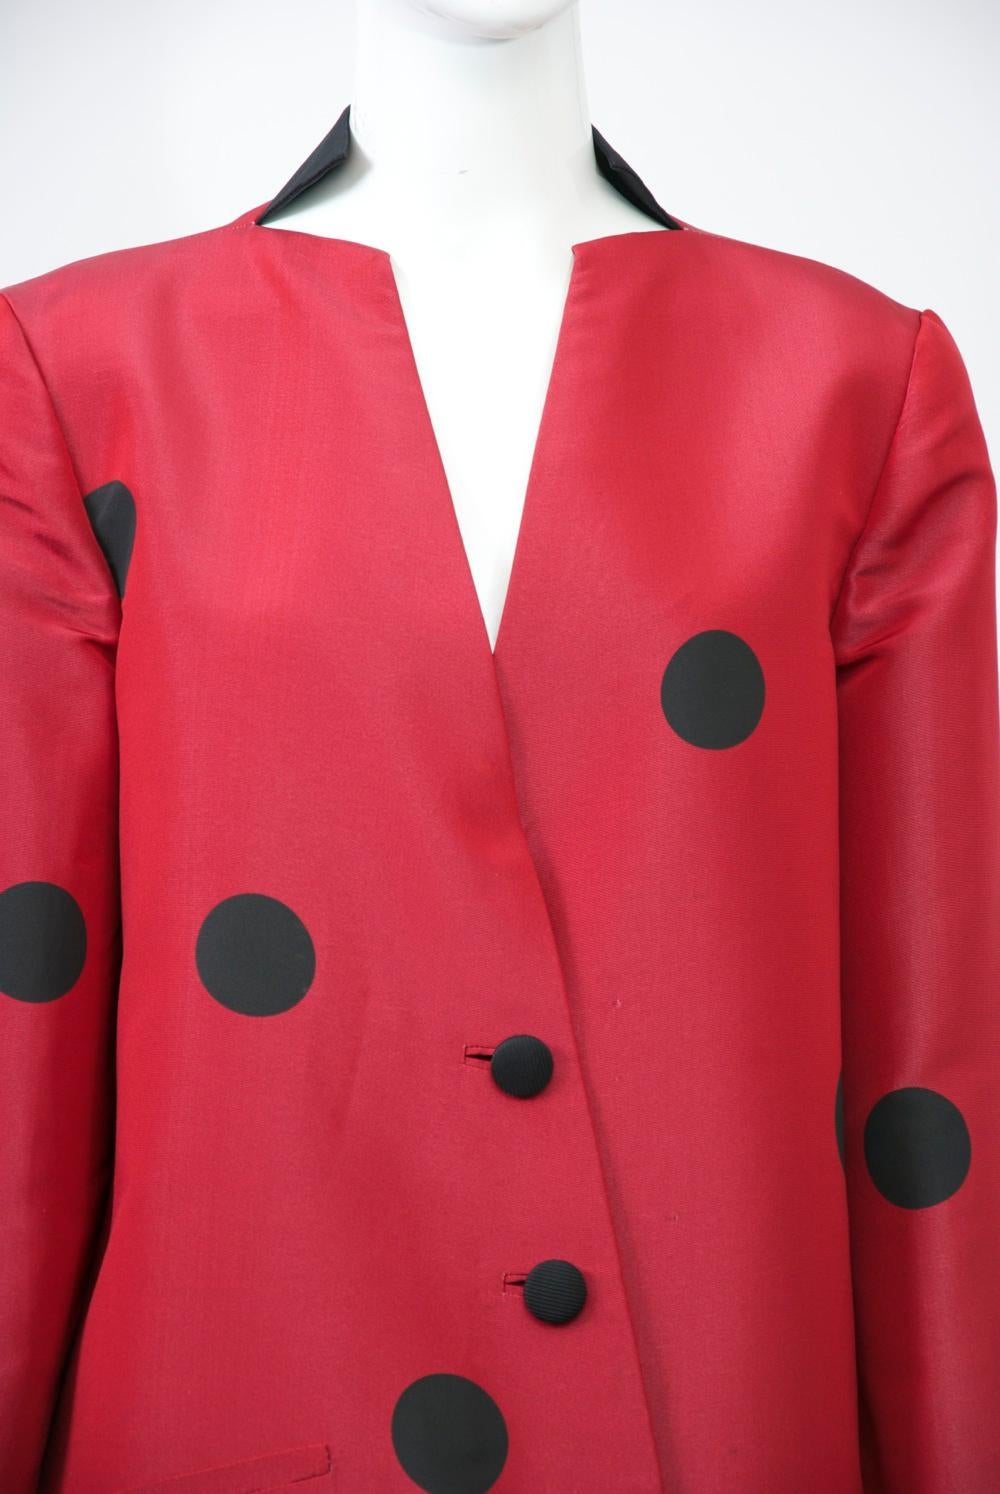 Typical of design master Geoffrey Beene, this suit exhibits the deceptive simplicity and attention to detail for which he was known. The silk jacket is fashioned of deep red silk with large black dots widely interspersed throughout. It has an